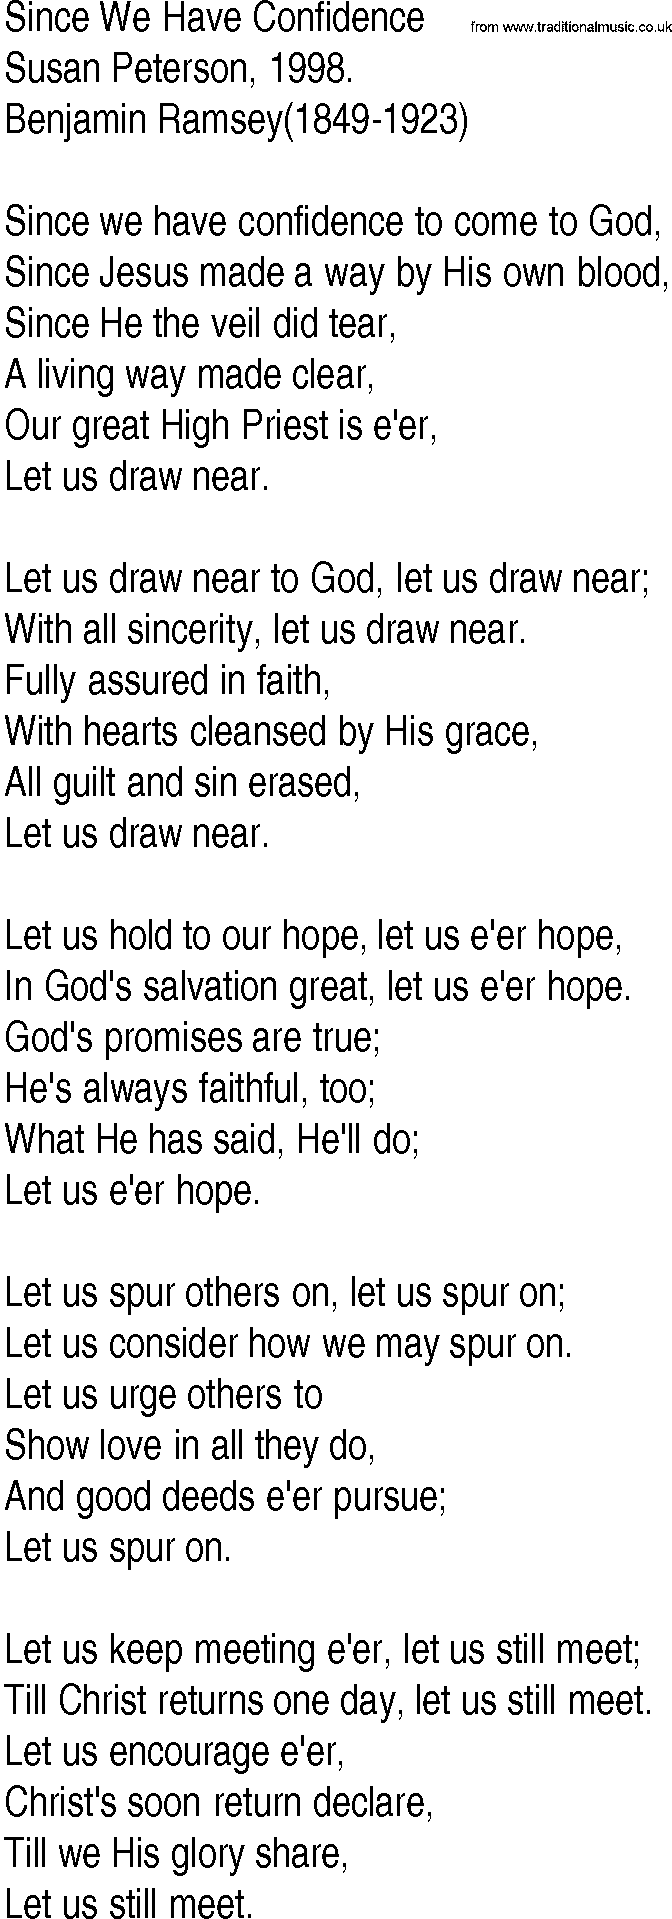 Hymn and Gospel Song: Since We Have Confidence by Susan Peterson lyrics